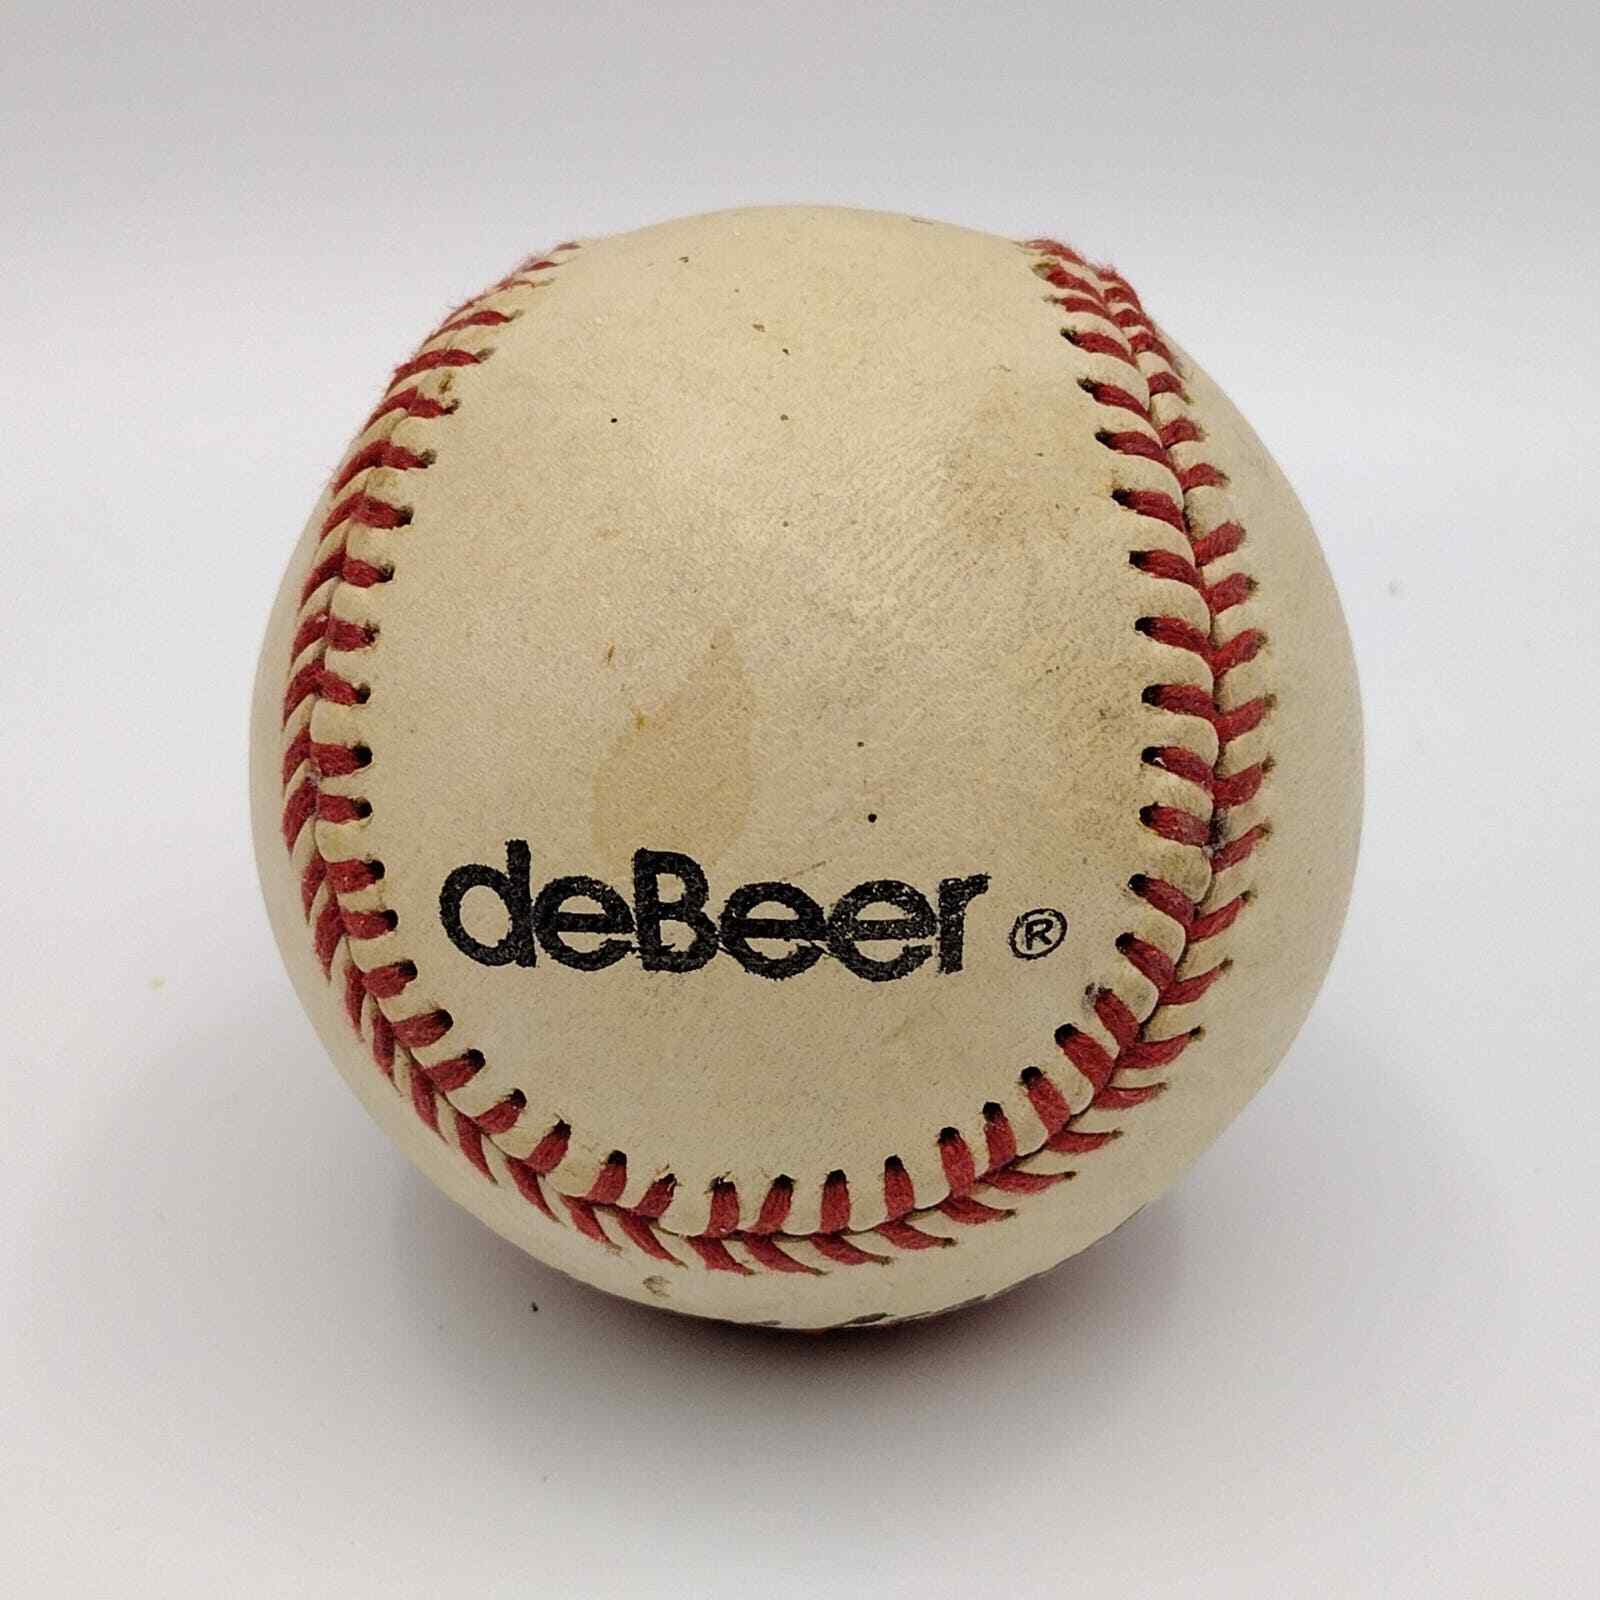 deBeer Official League Baseball Leather Cover No 75C Solid Cork Rubber Core